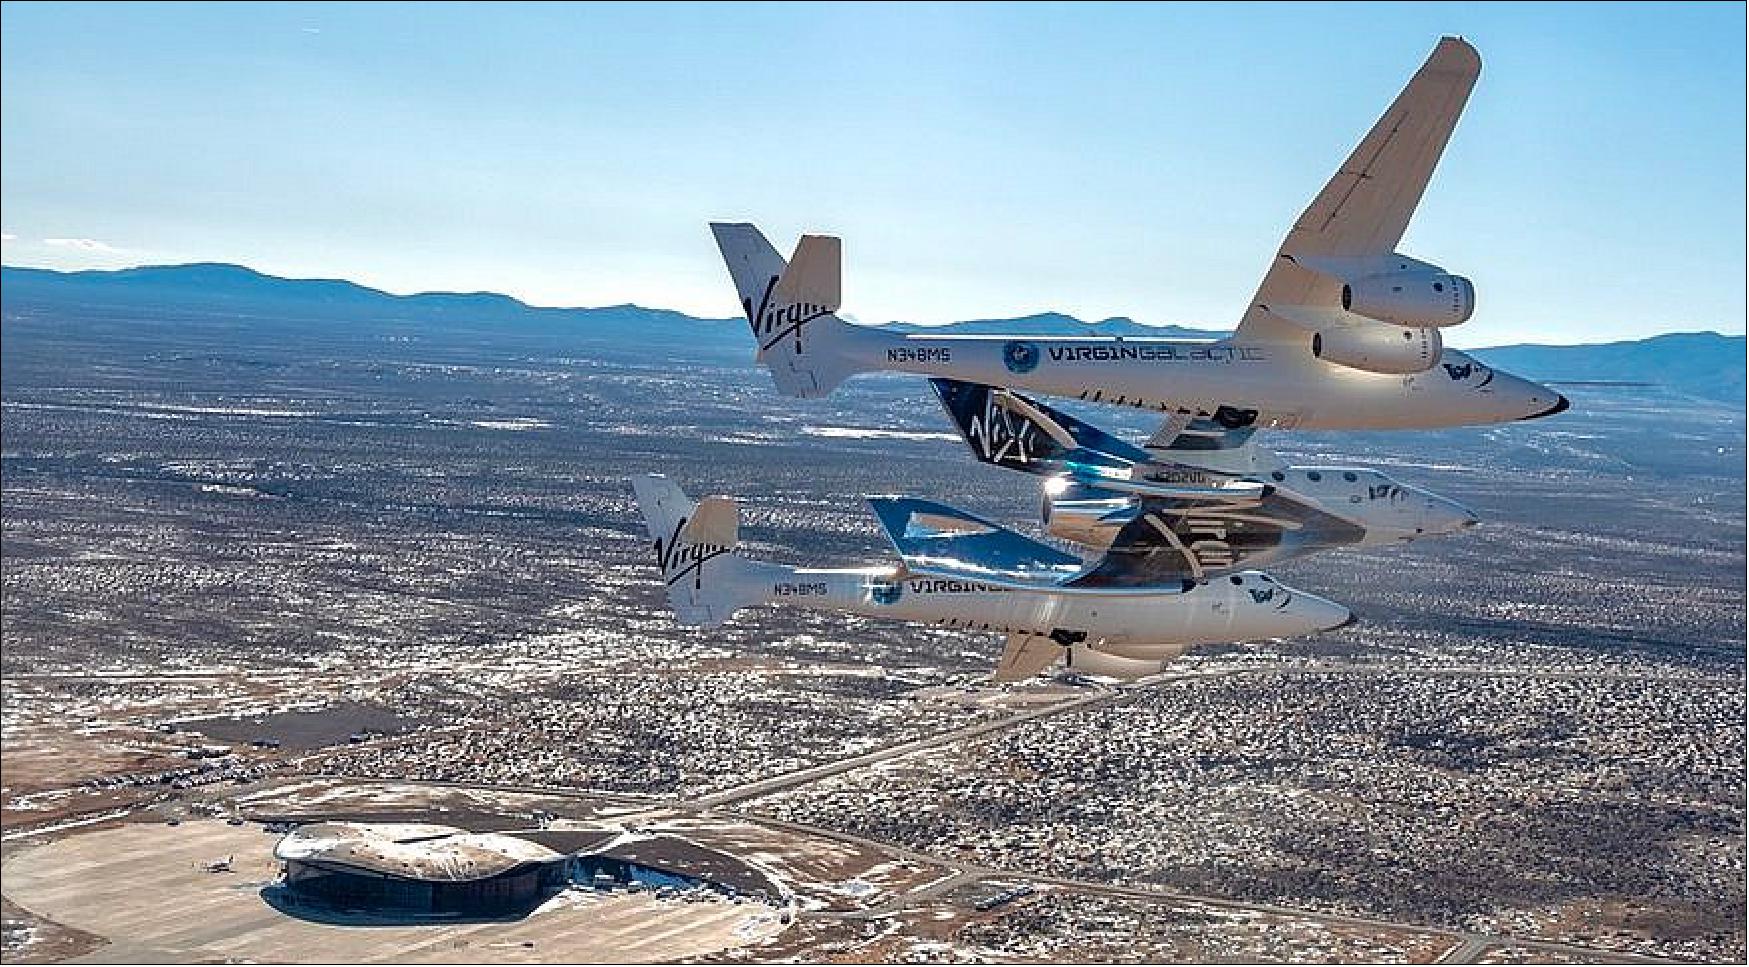 Figure 7: Virgin Galactic hopes to have both its WhiteKnightTwo aircraft and SpaceShipTwo suborbital spaceplane in commercial service before the end of the year after both complete extensive maintenance (image credit: Virgin Galactic)